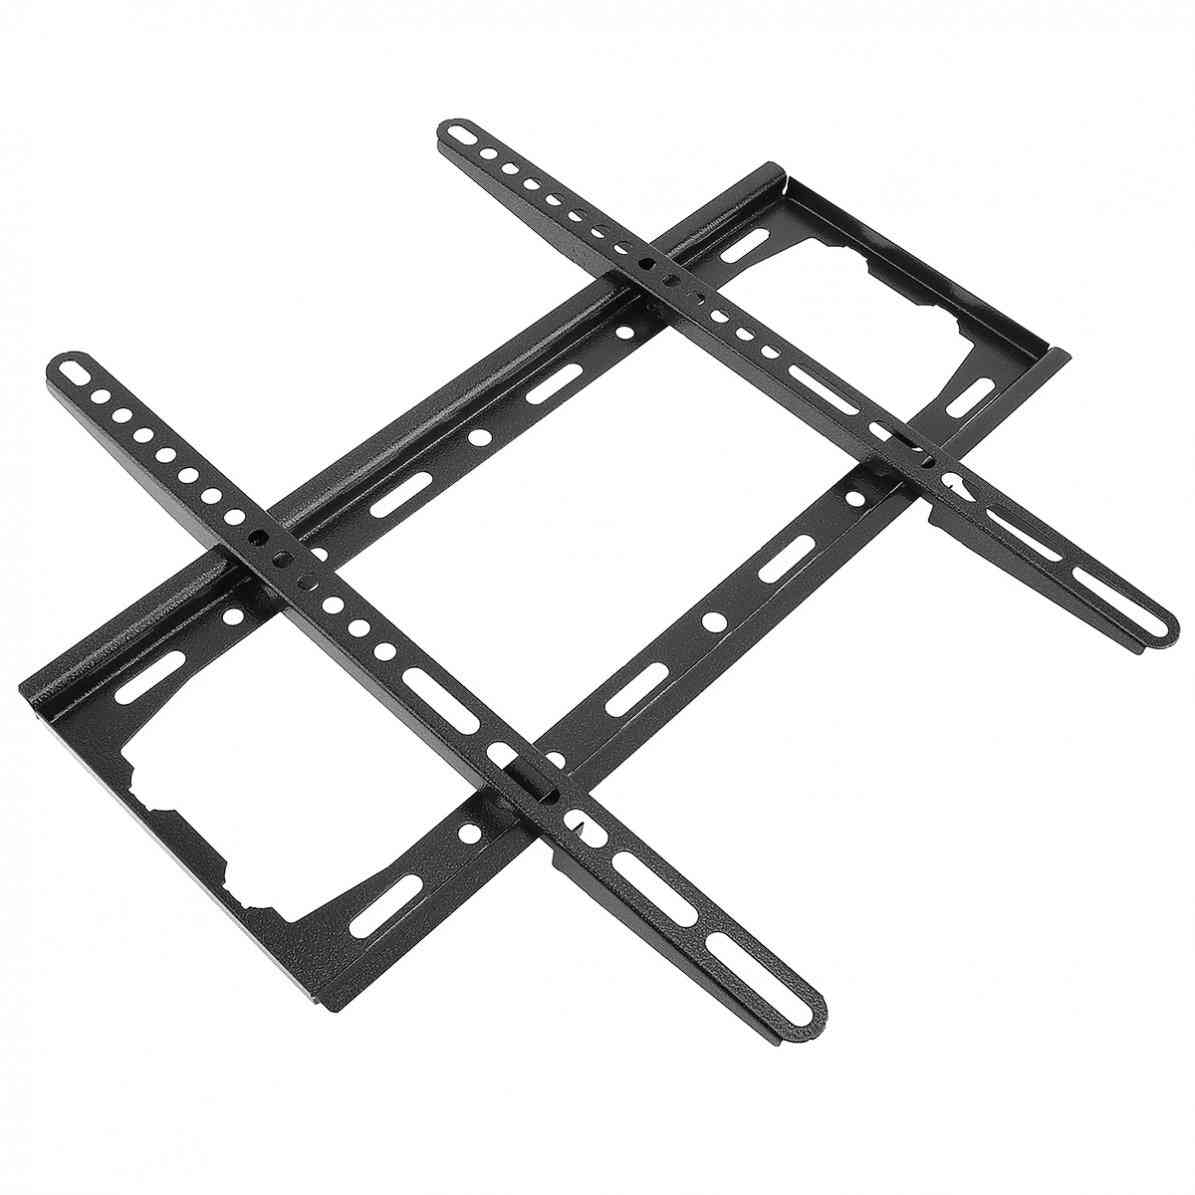 Universal Wall Mount Tv Bracket, Fixed Flat Panel For 26-55 Inch Lcd/led Monitor